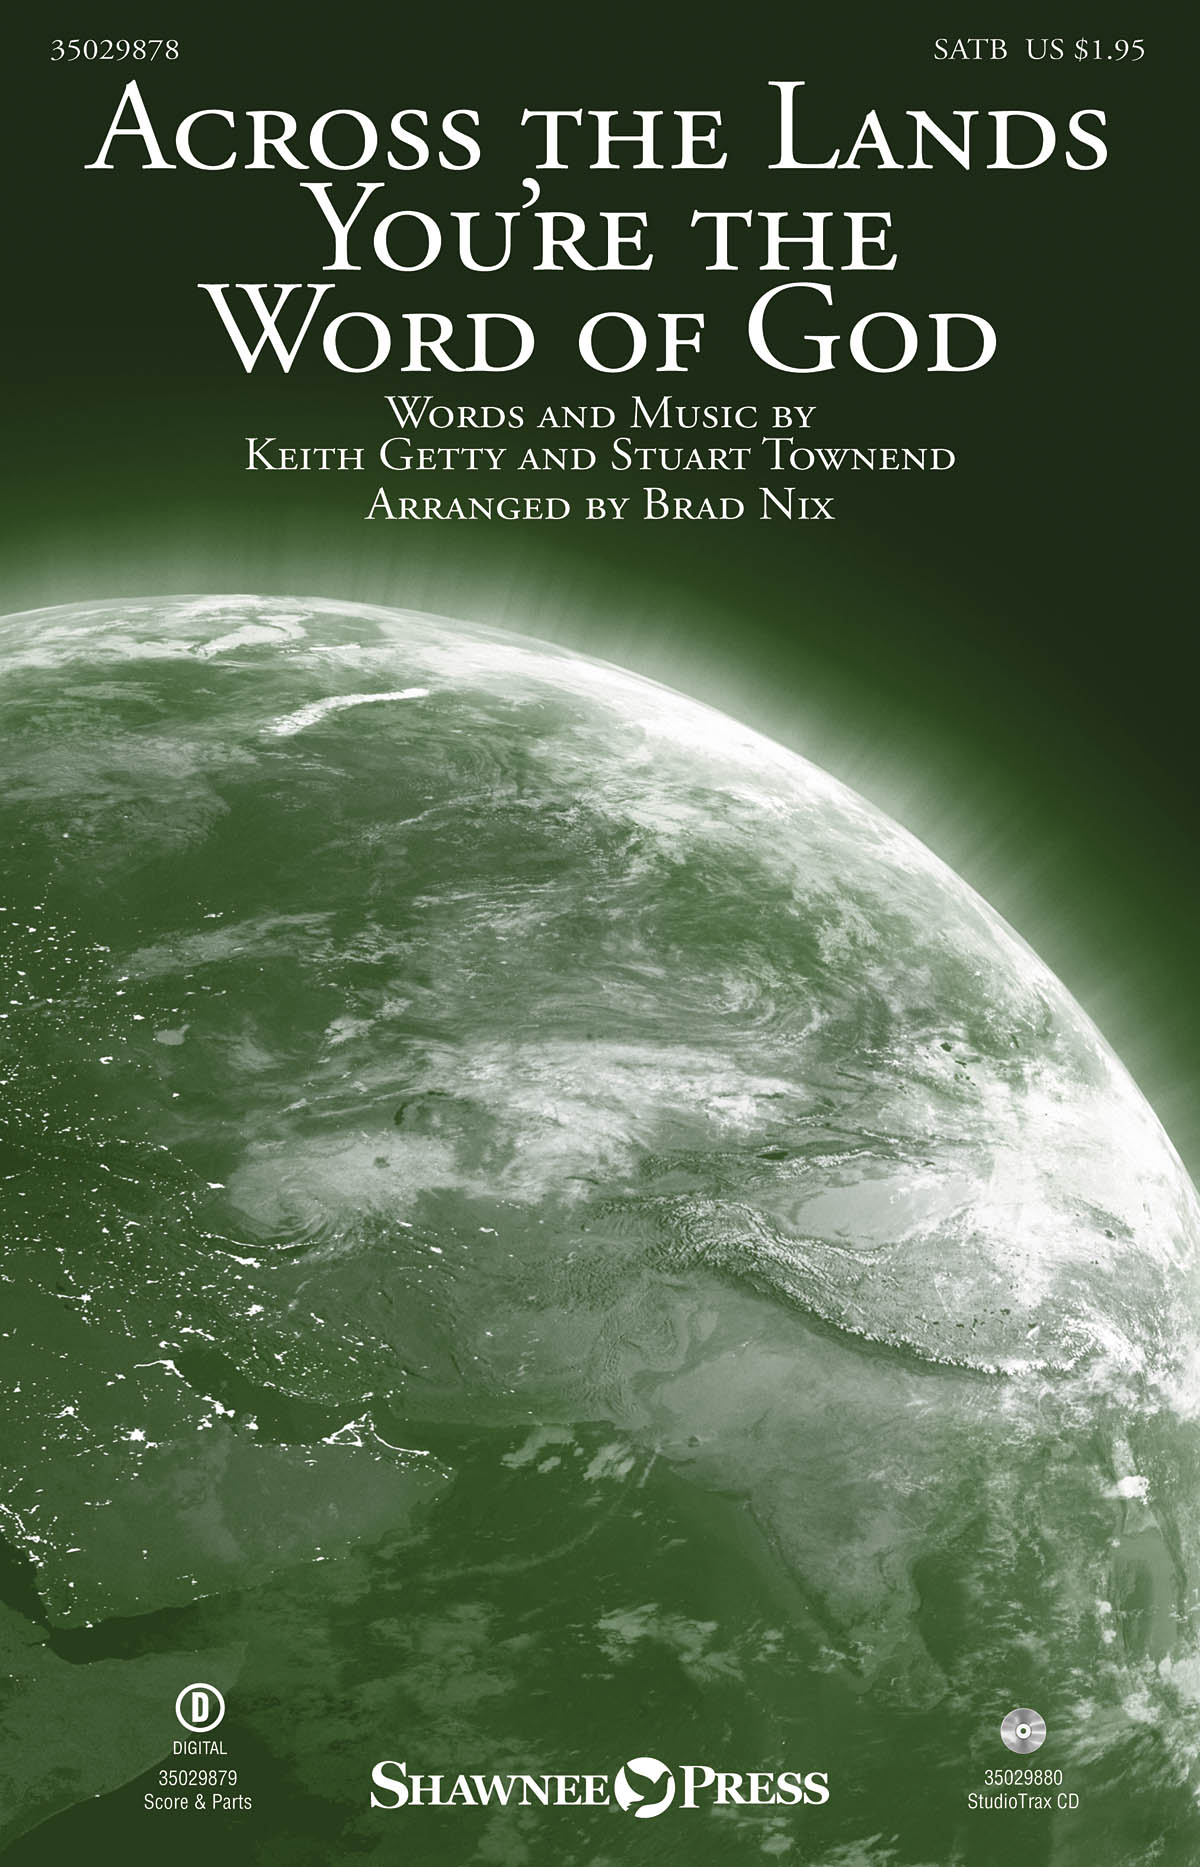 Keith Getty Stuart Townend: Across the Lands You're the Word of God: SATB: Vocal